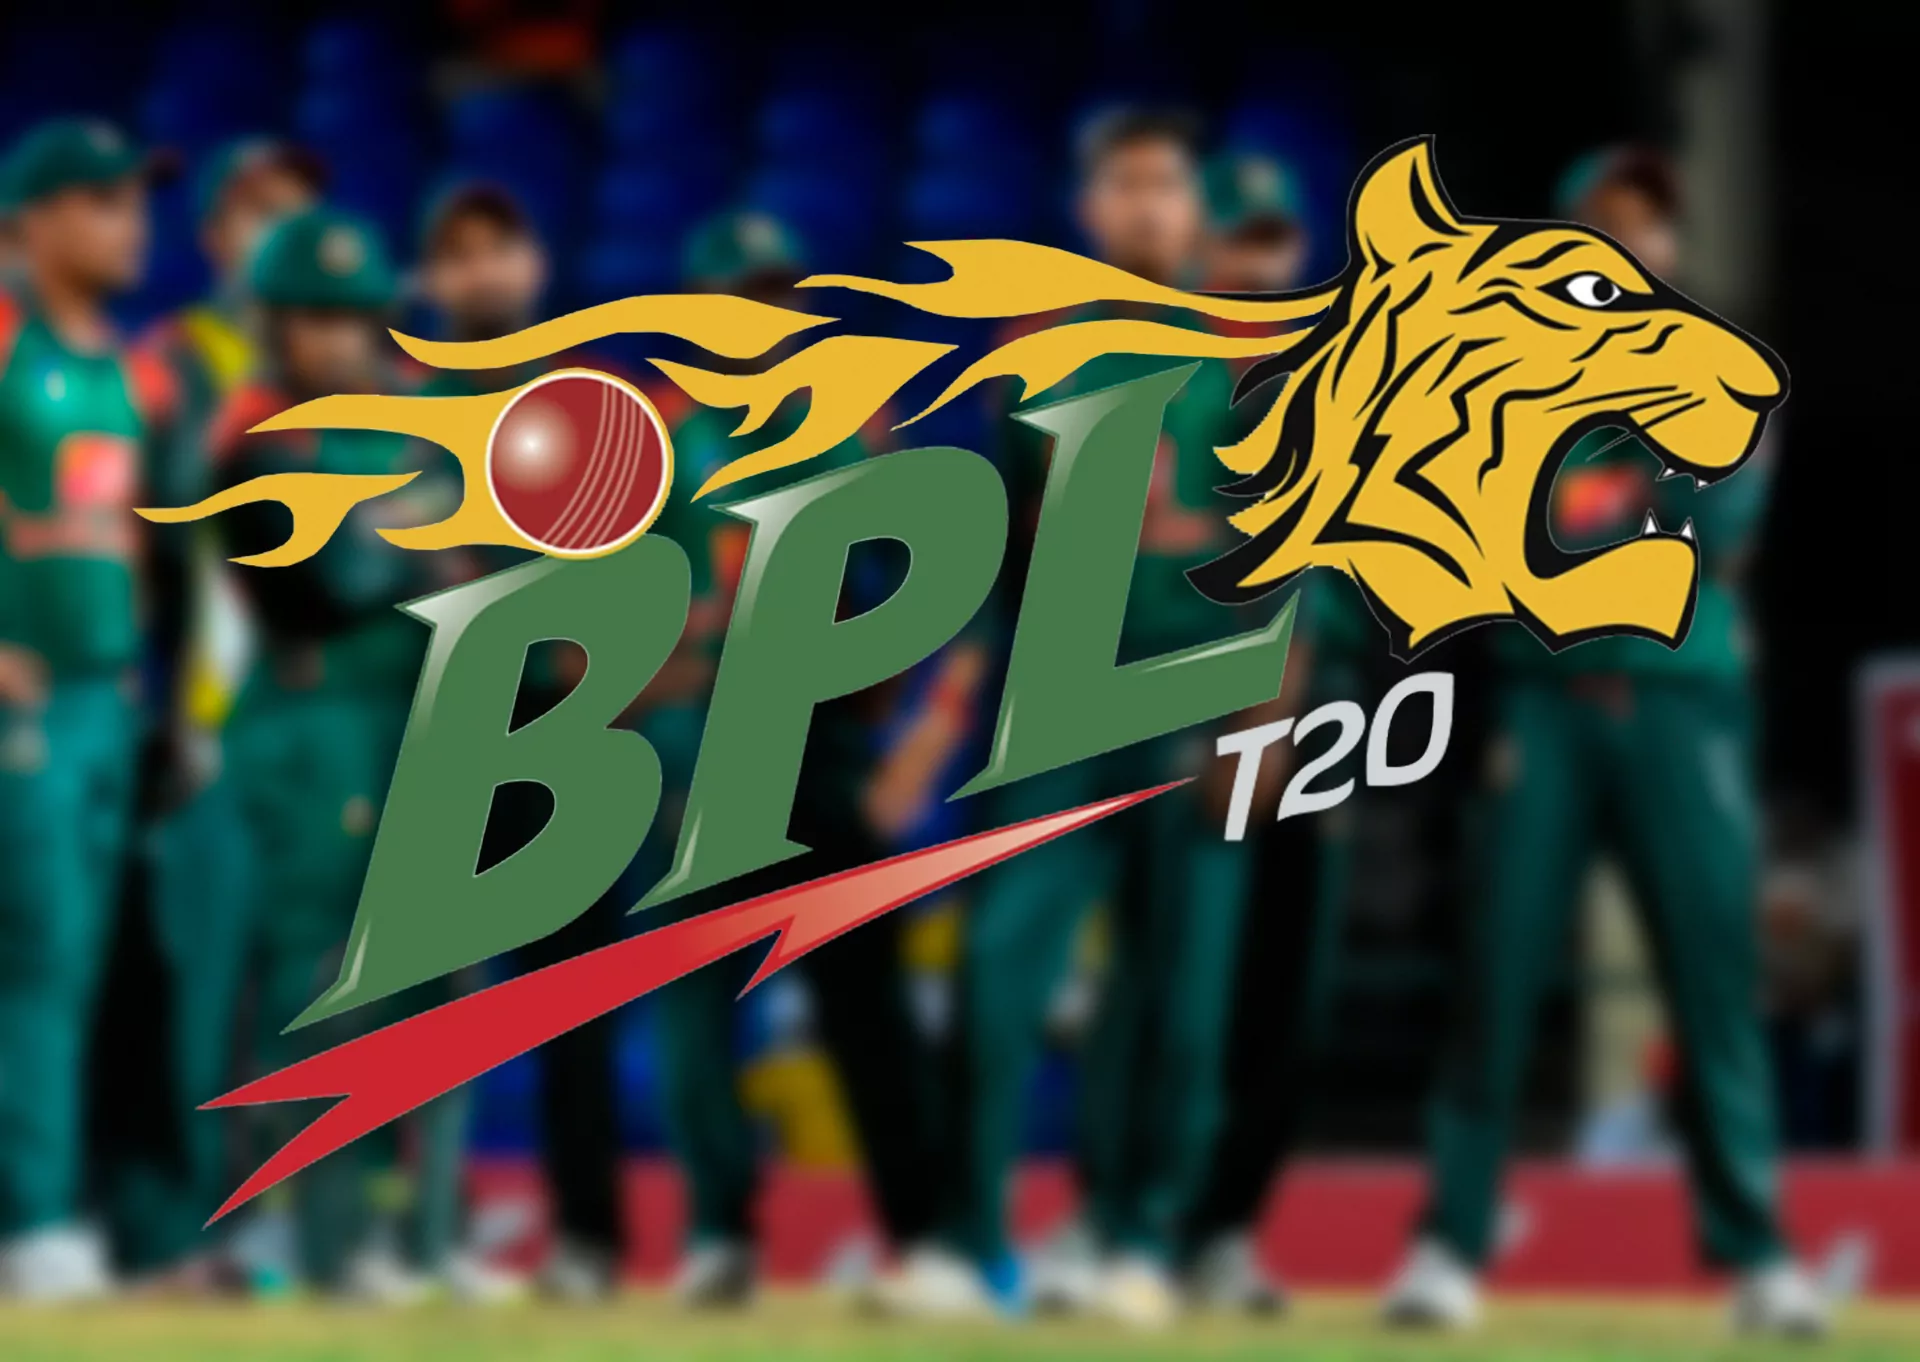 The Bangladesh Premier League is the most important local cricket tournament you can place a bet on.